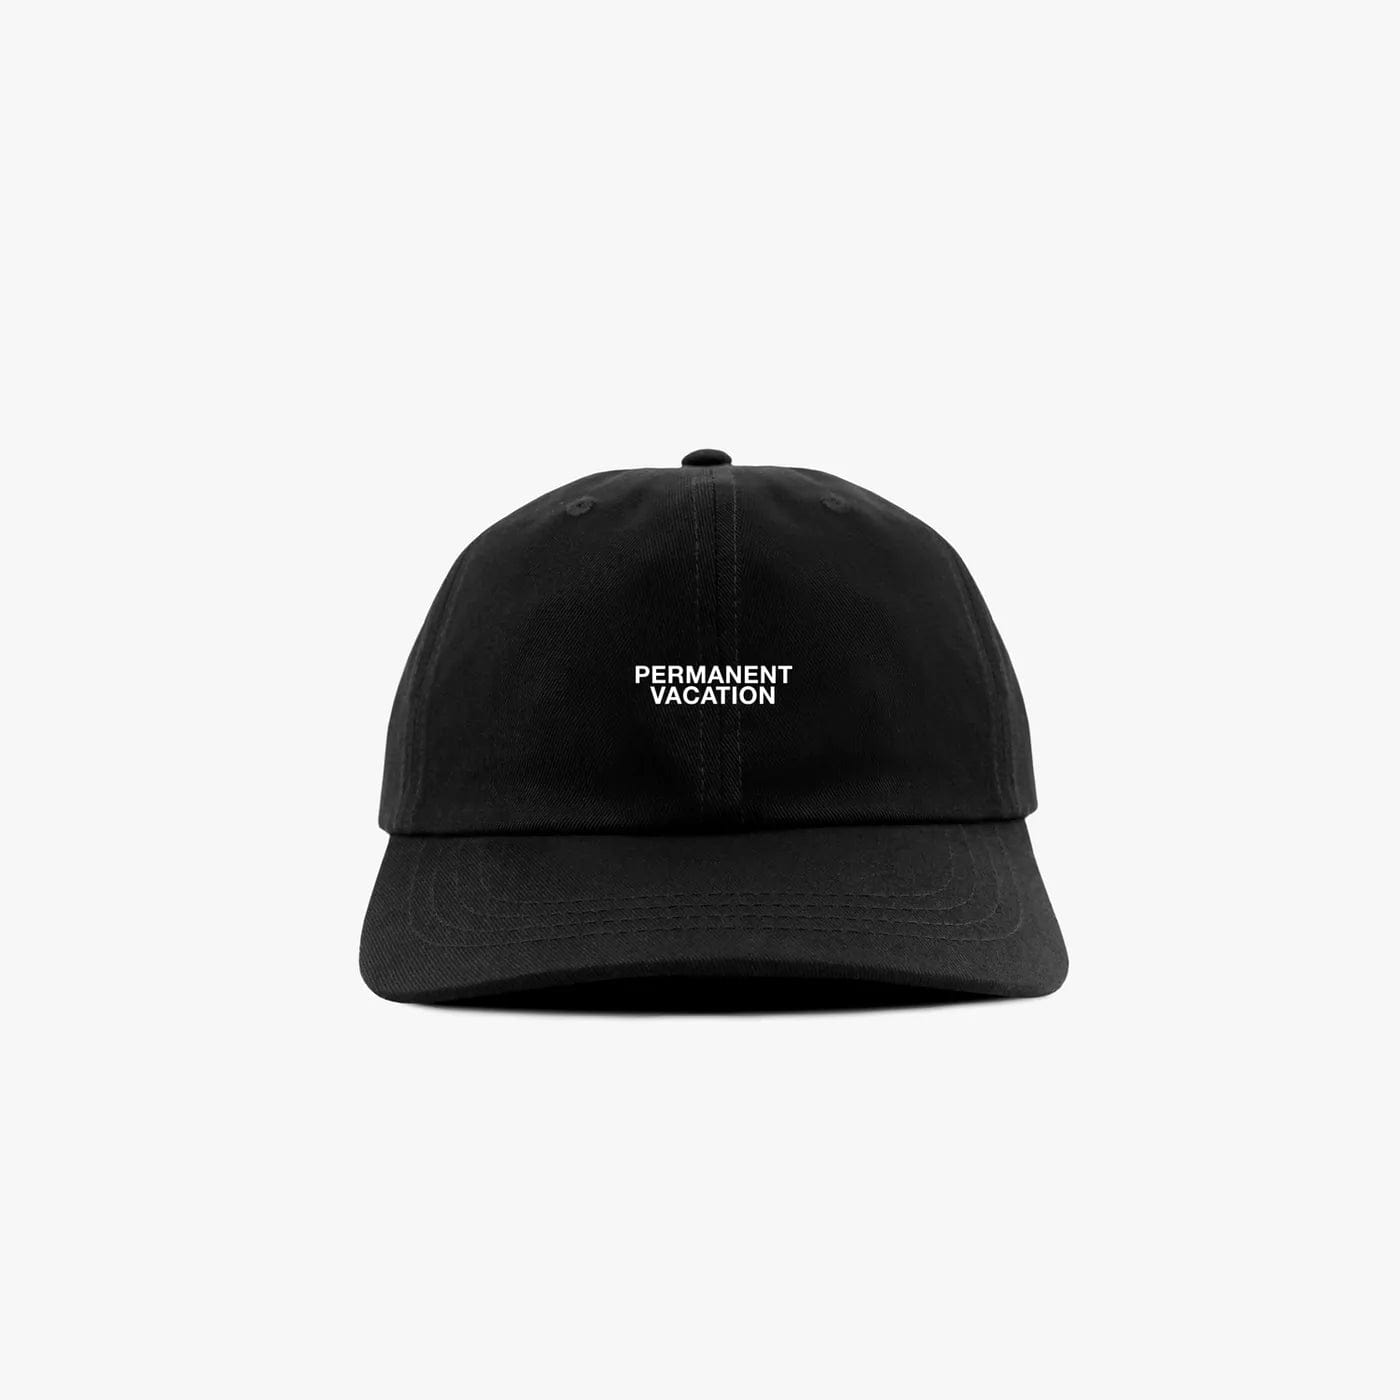 'Permanent Vacation' Classic Hat